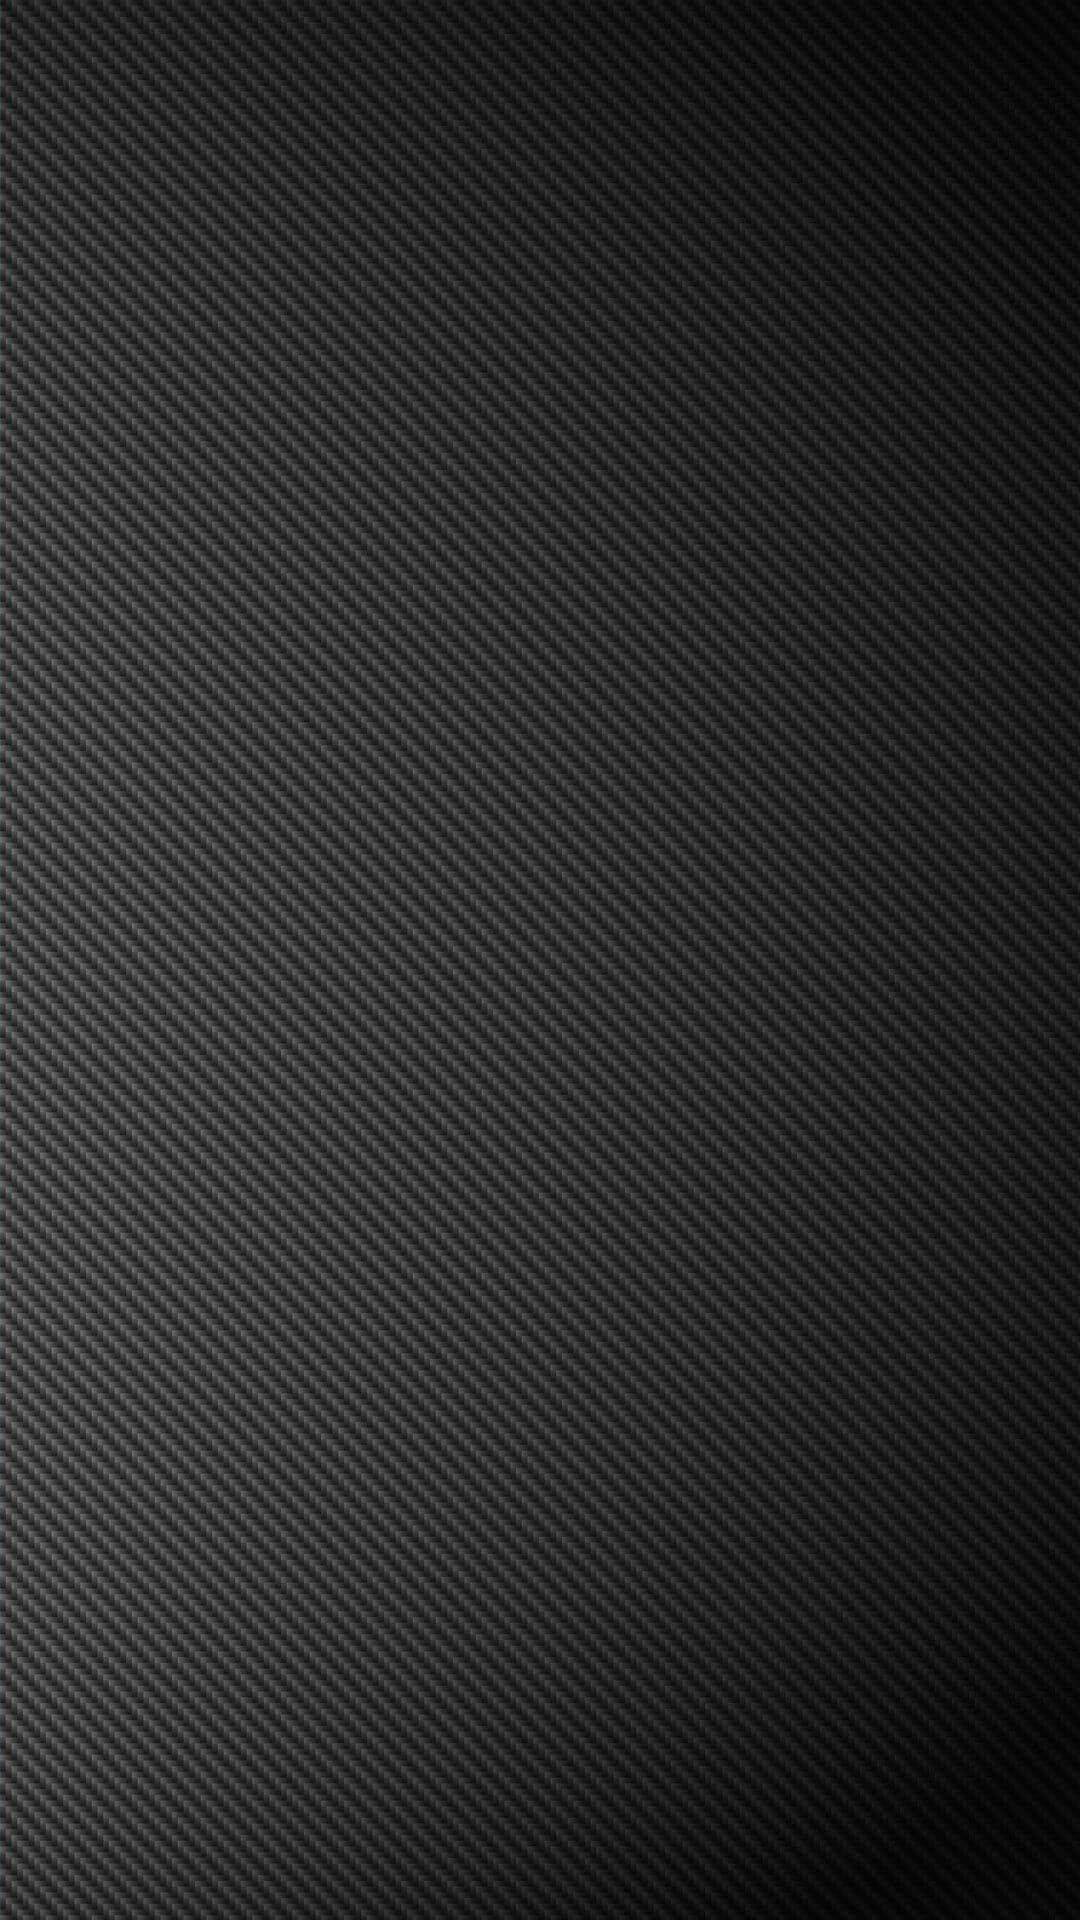 Grey Iphone Diagonal Lines Background